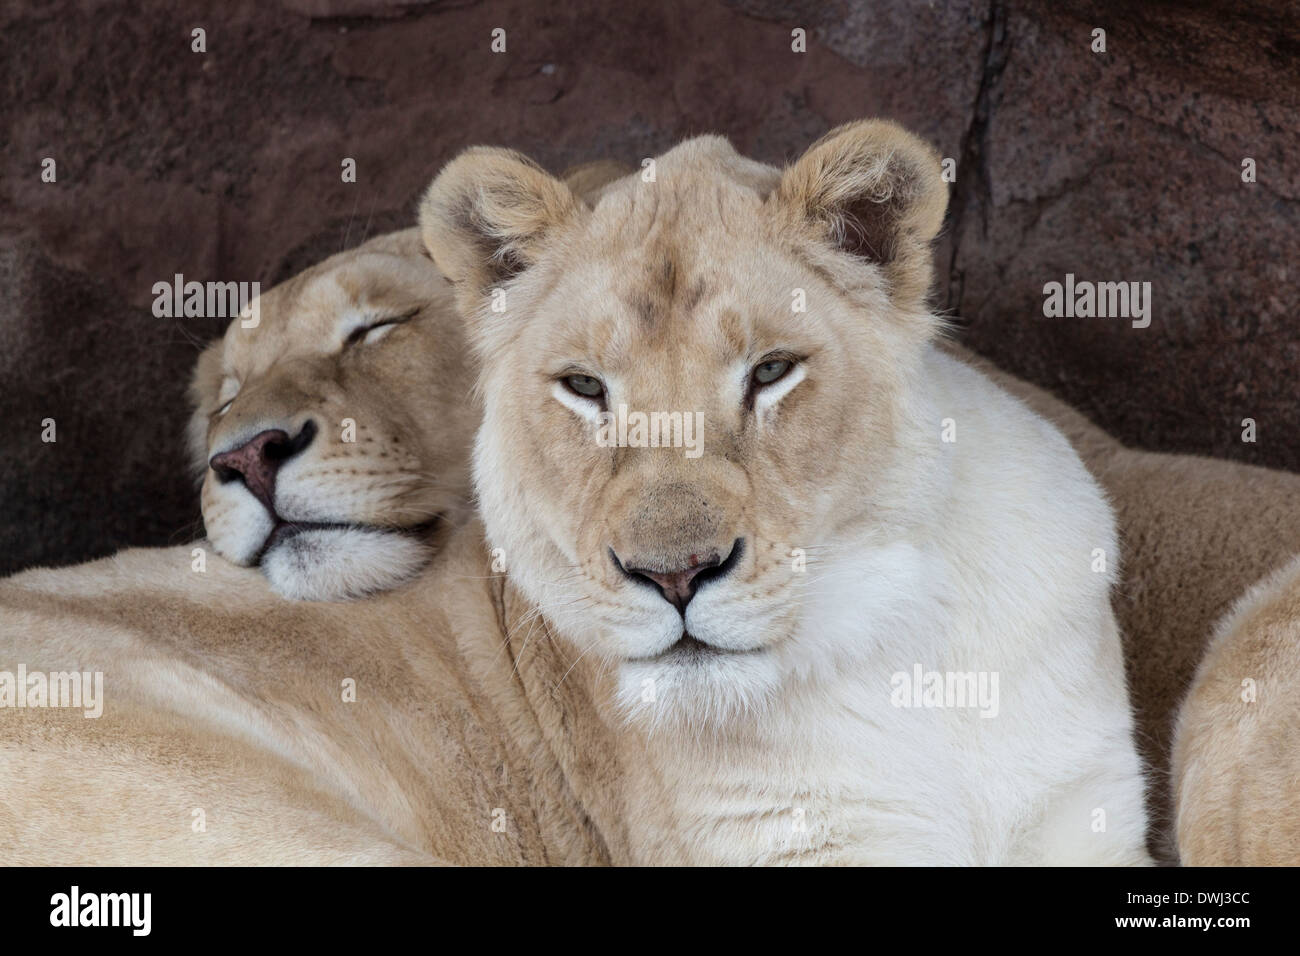 Two White Lionesses At The Toronto Zoo Stock Photo